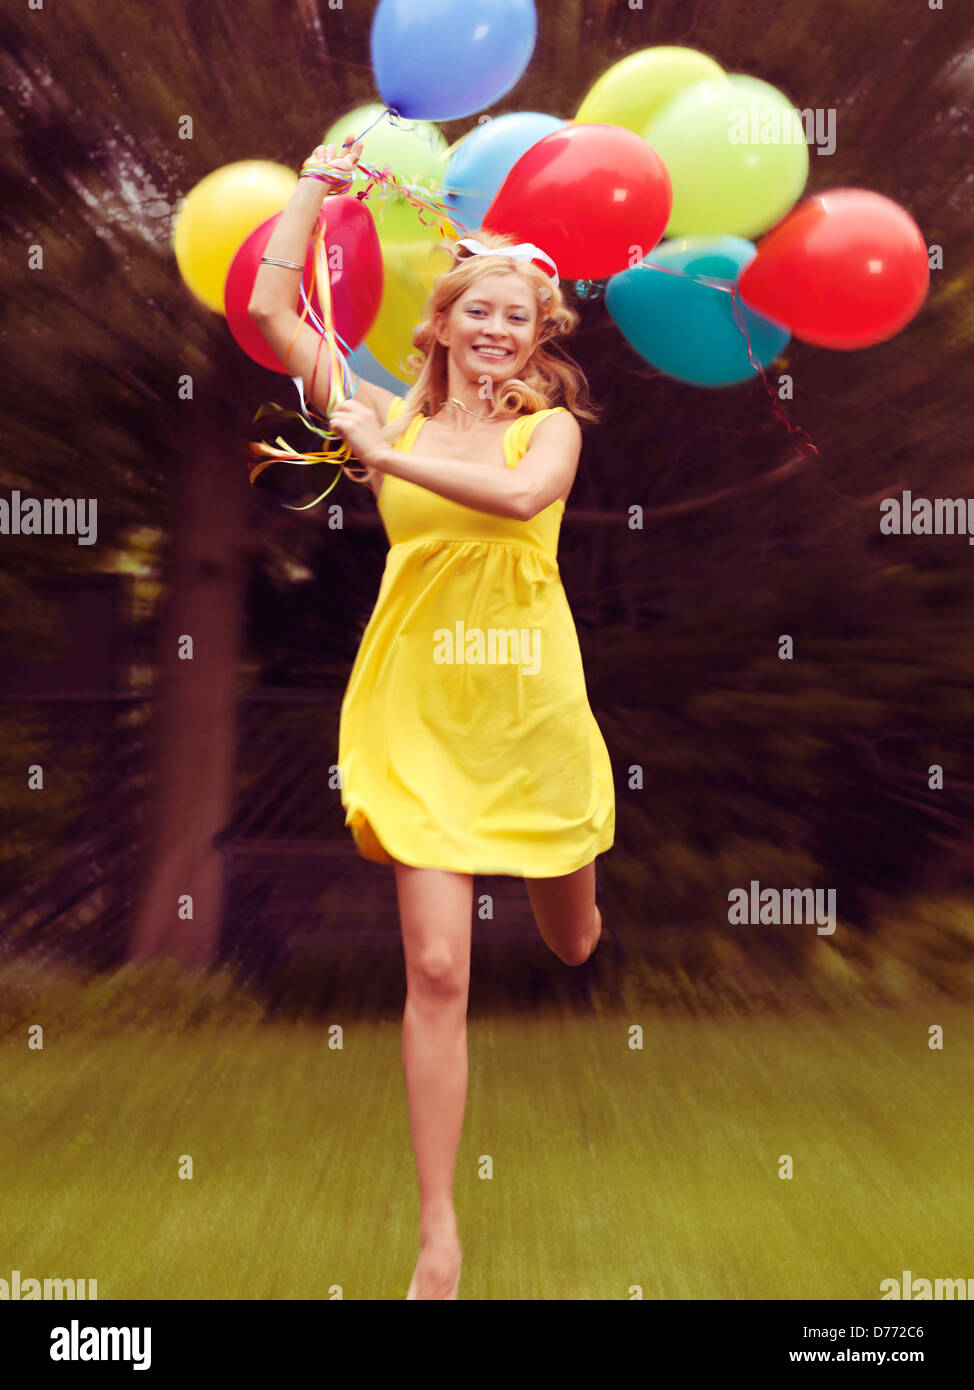 Happy young woman in summer dress running with colorful balloons Stock Photo